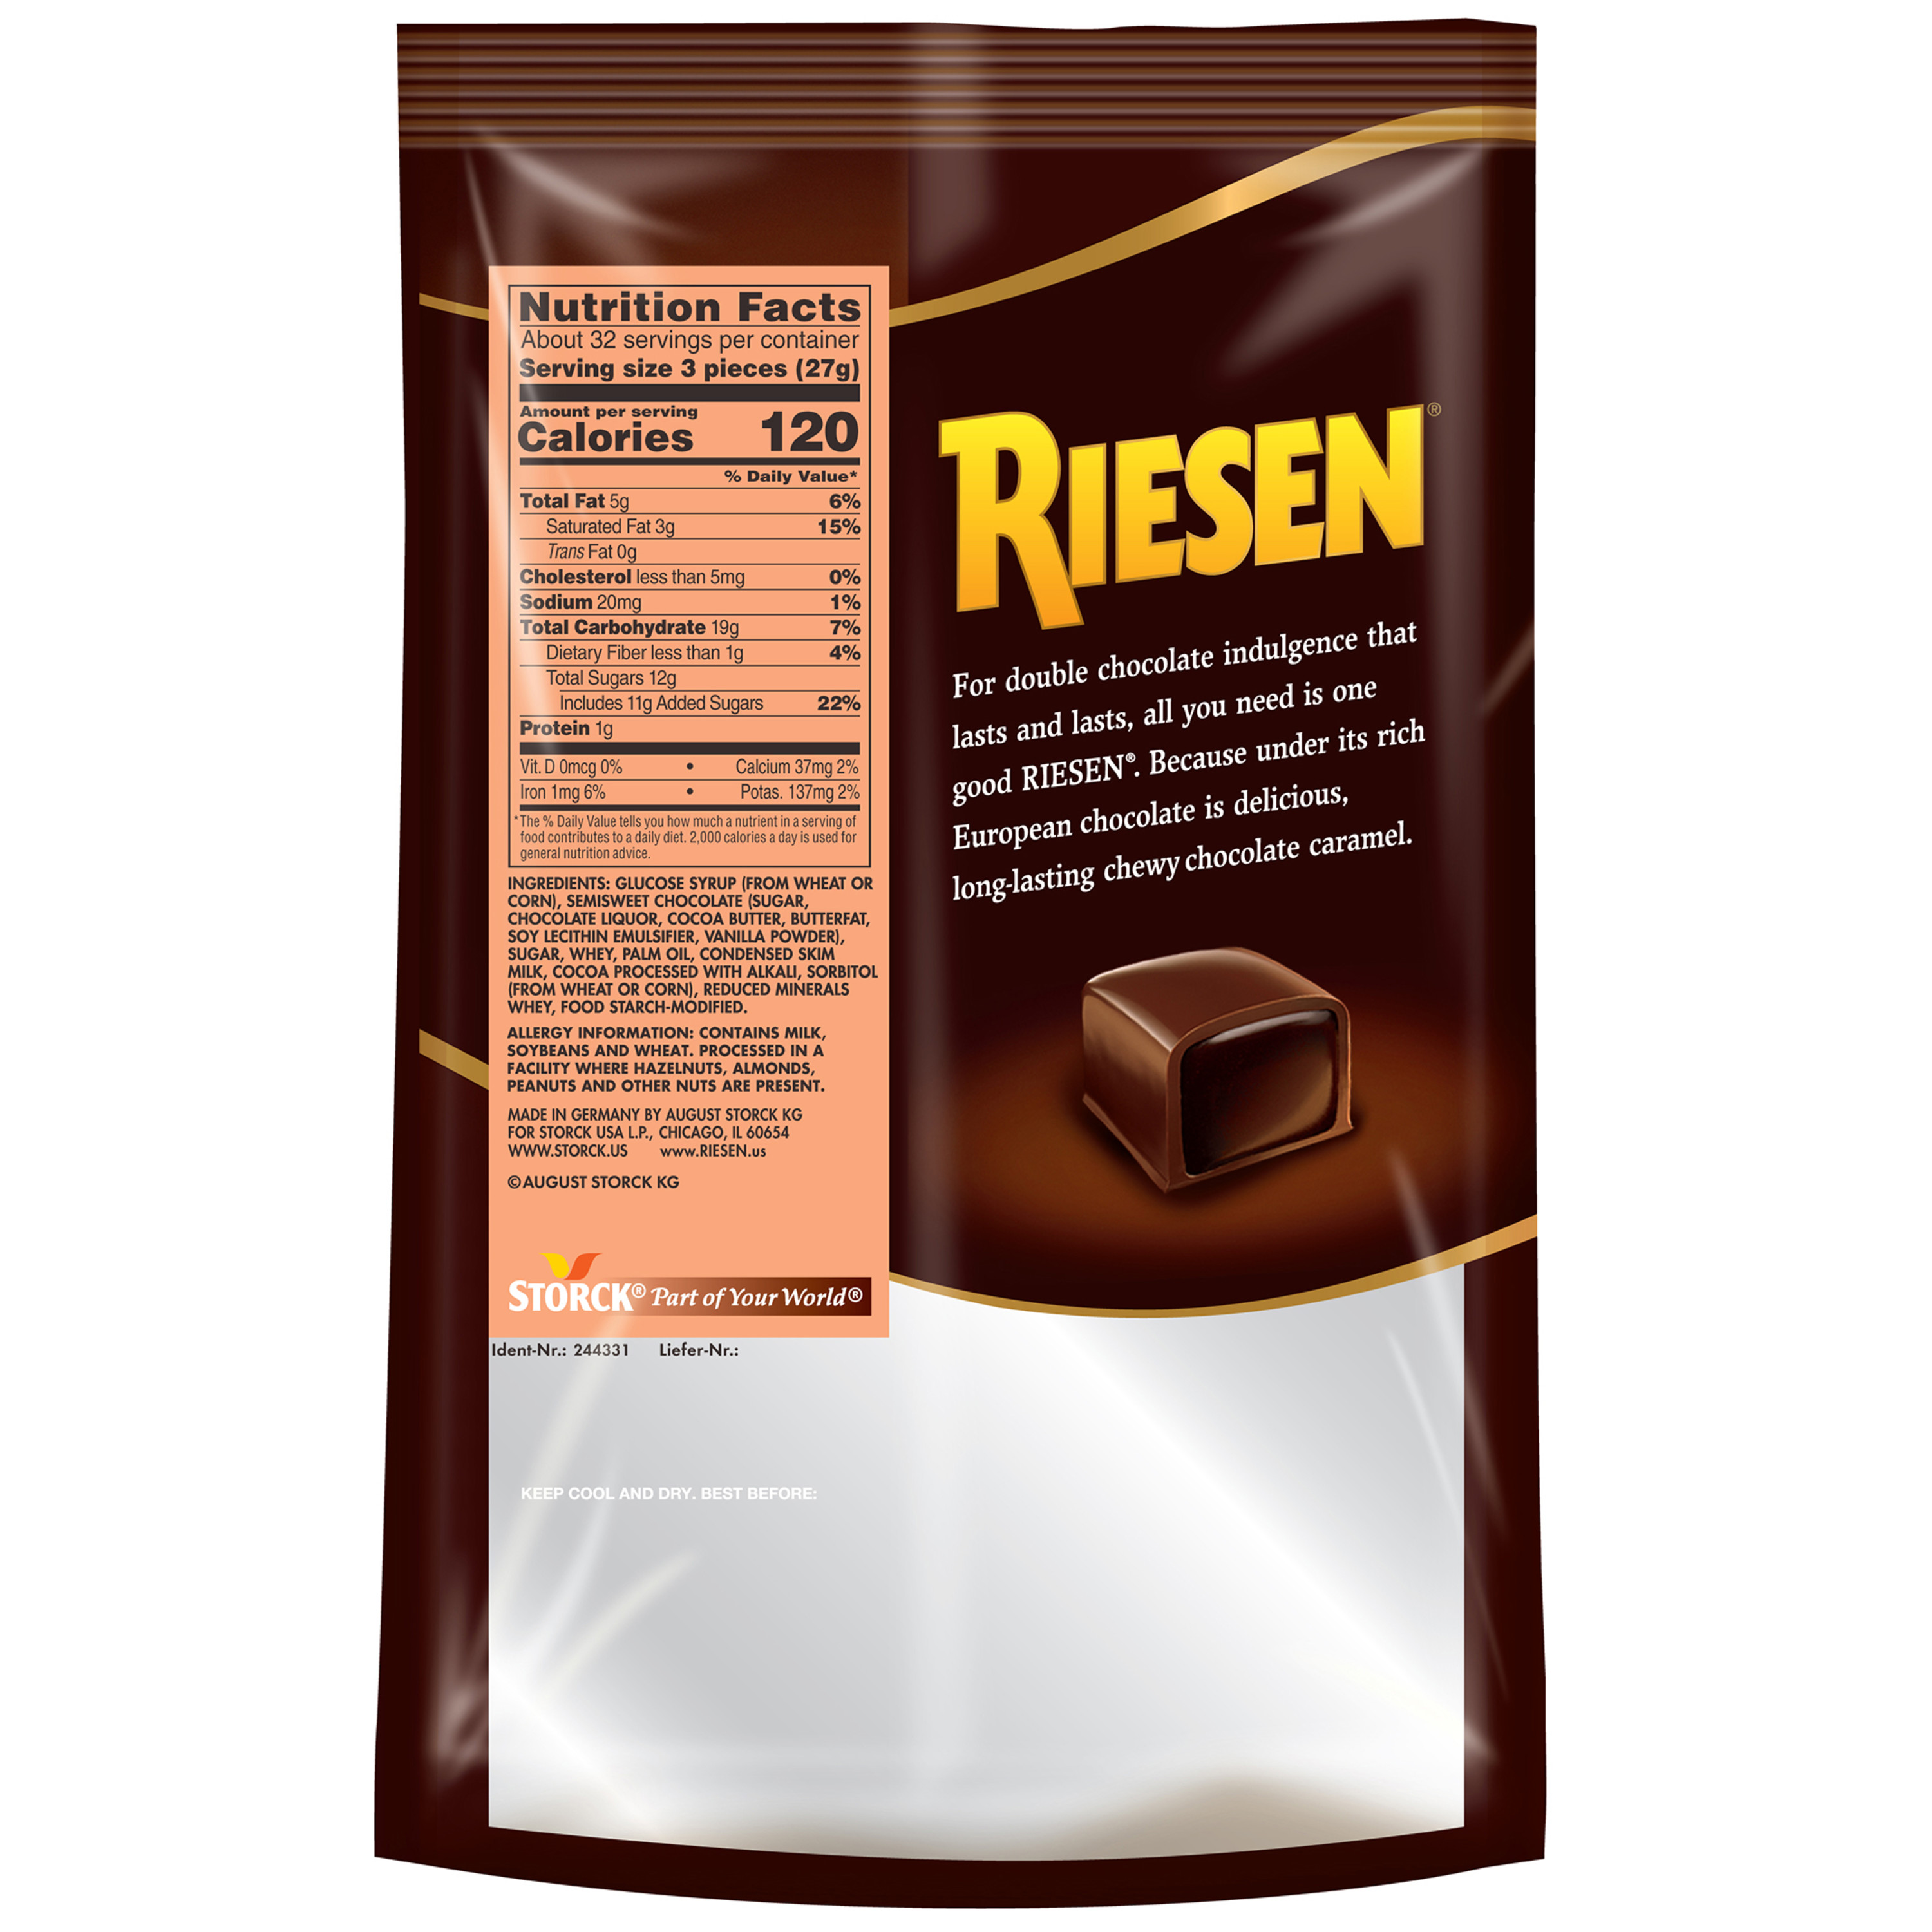 RIESEN Chewy Chocolate Covered Caramel Candy, 30 oz - image 3 of 7